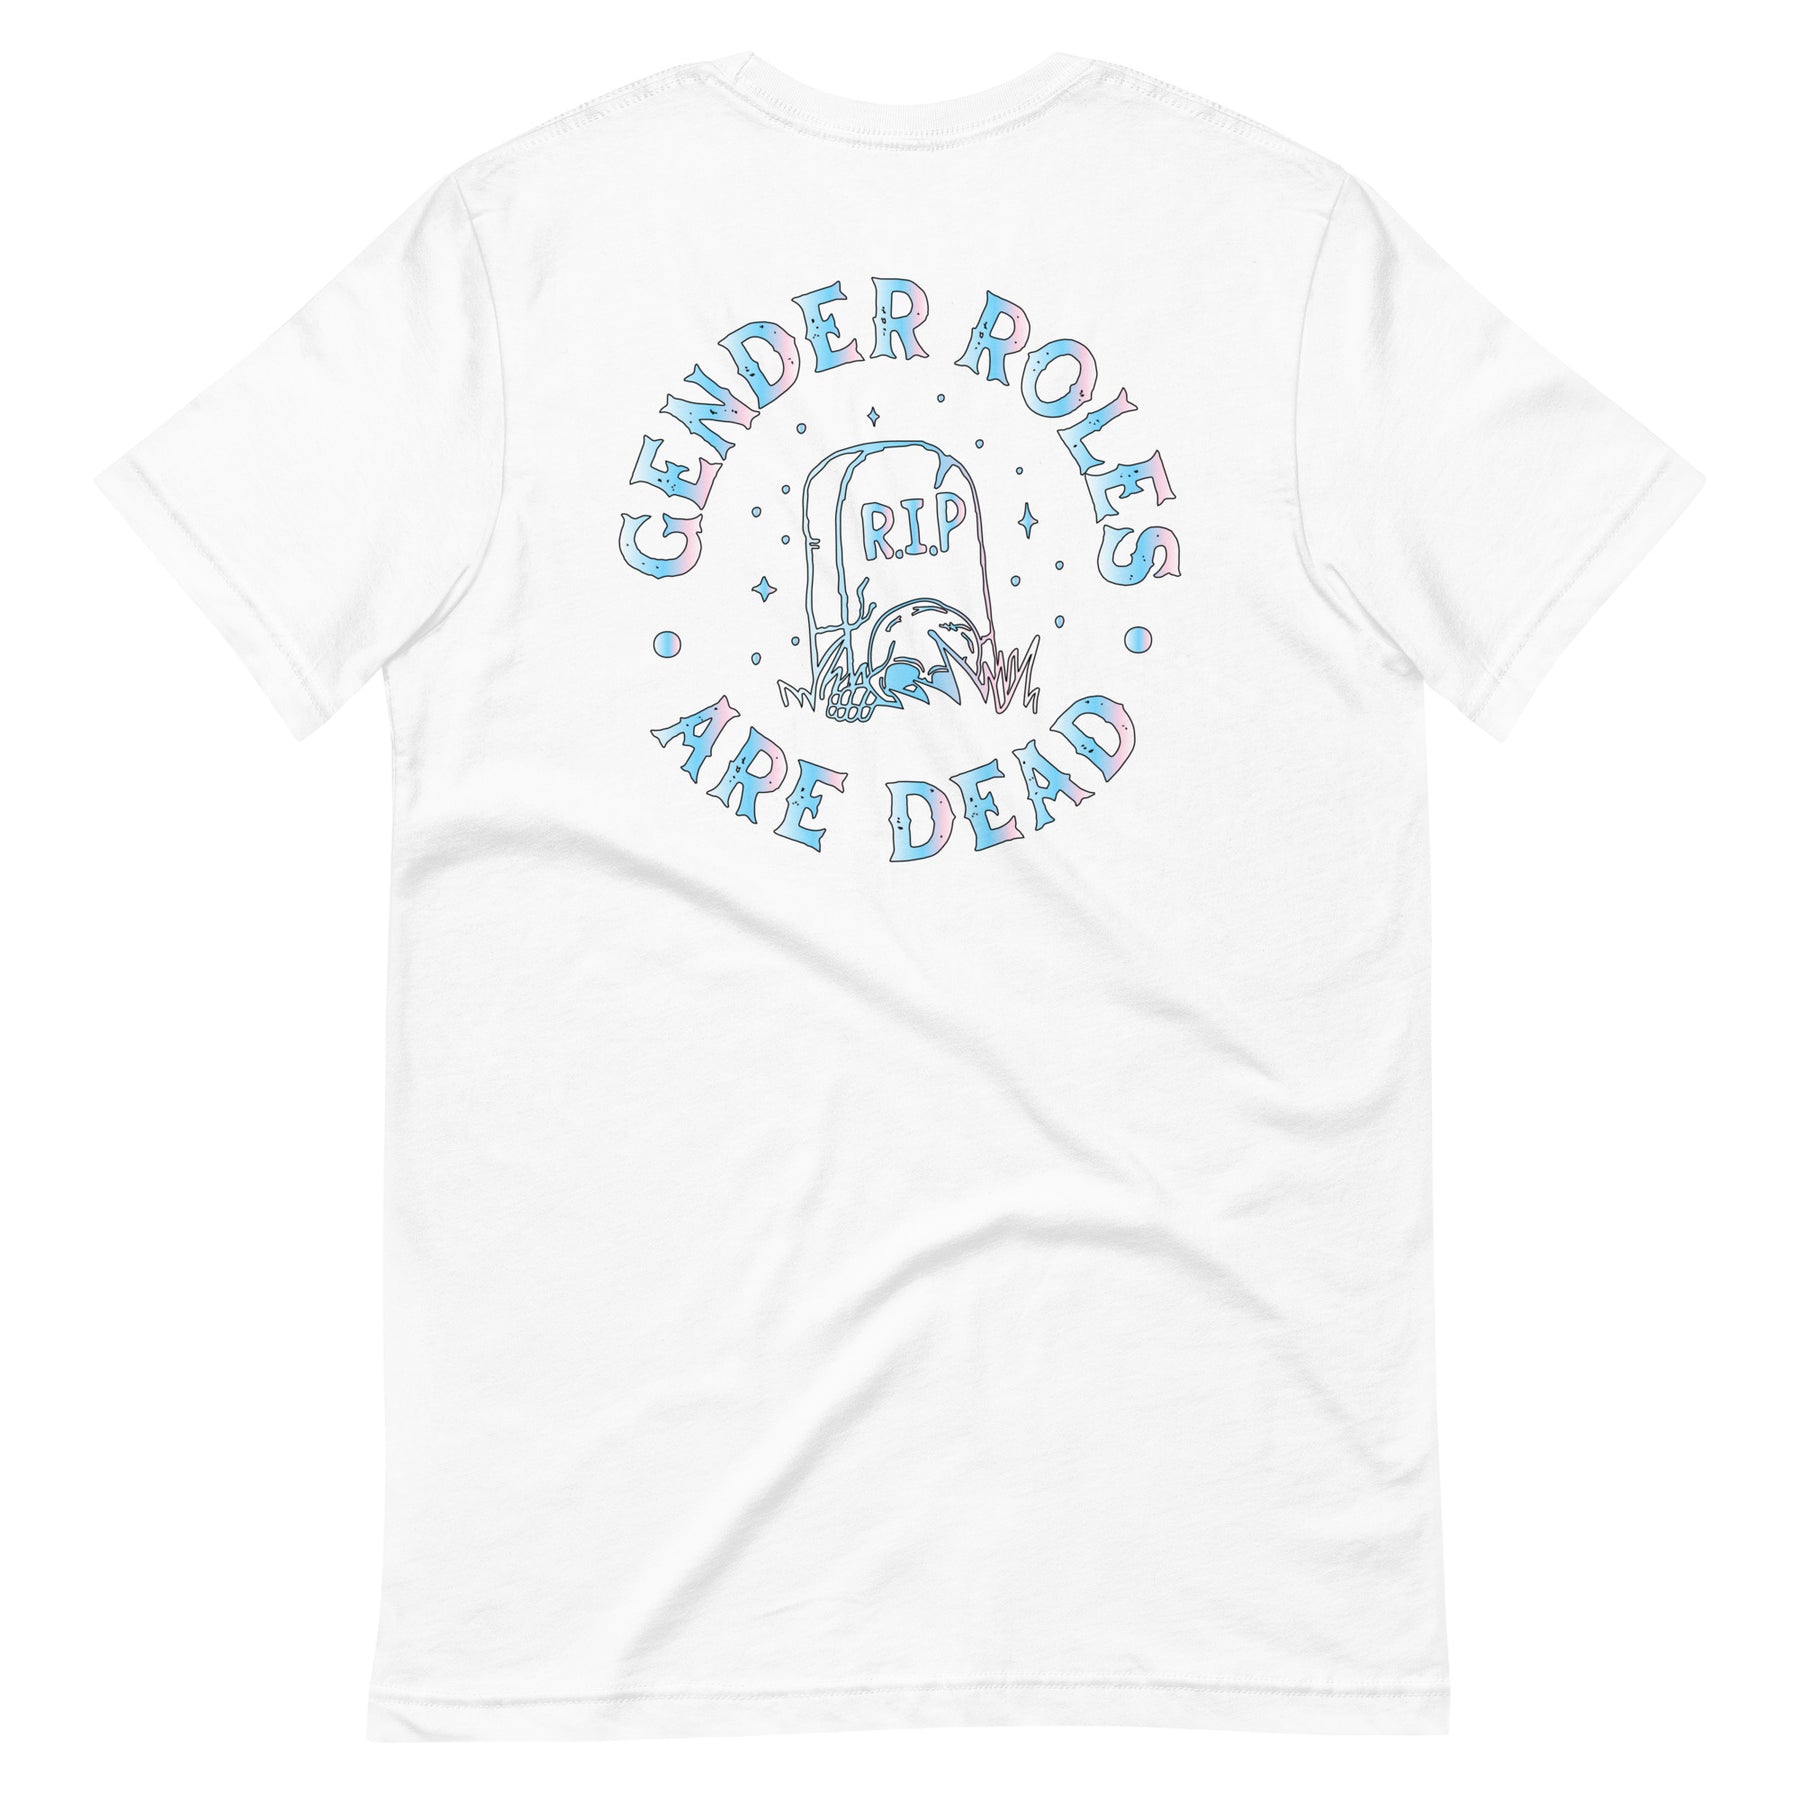 Gender Roles Are Dead Shirt